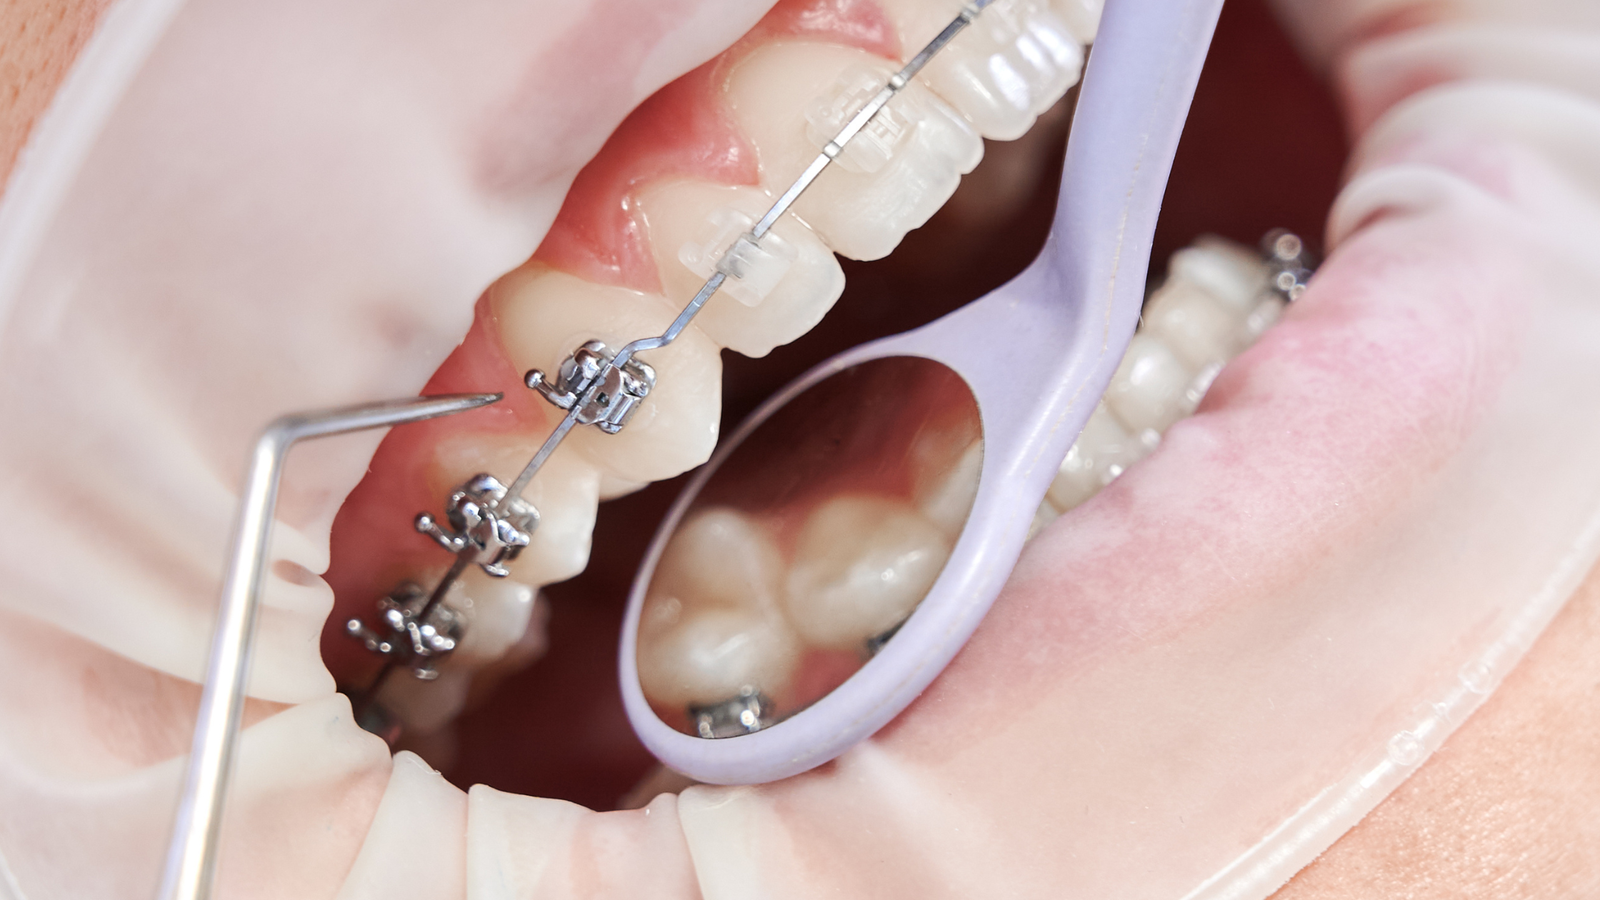 You are currently viewing PREPARING FOR BRACES: KEY QUESTIONS TO ASK YOUR ORTHODONTIST